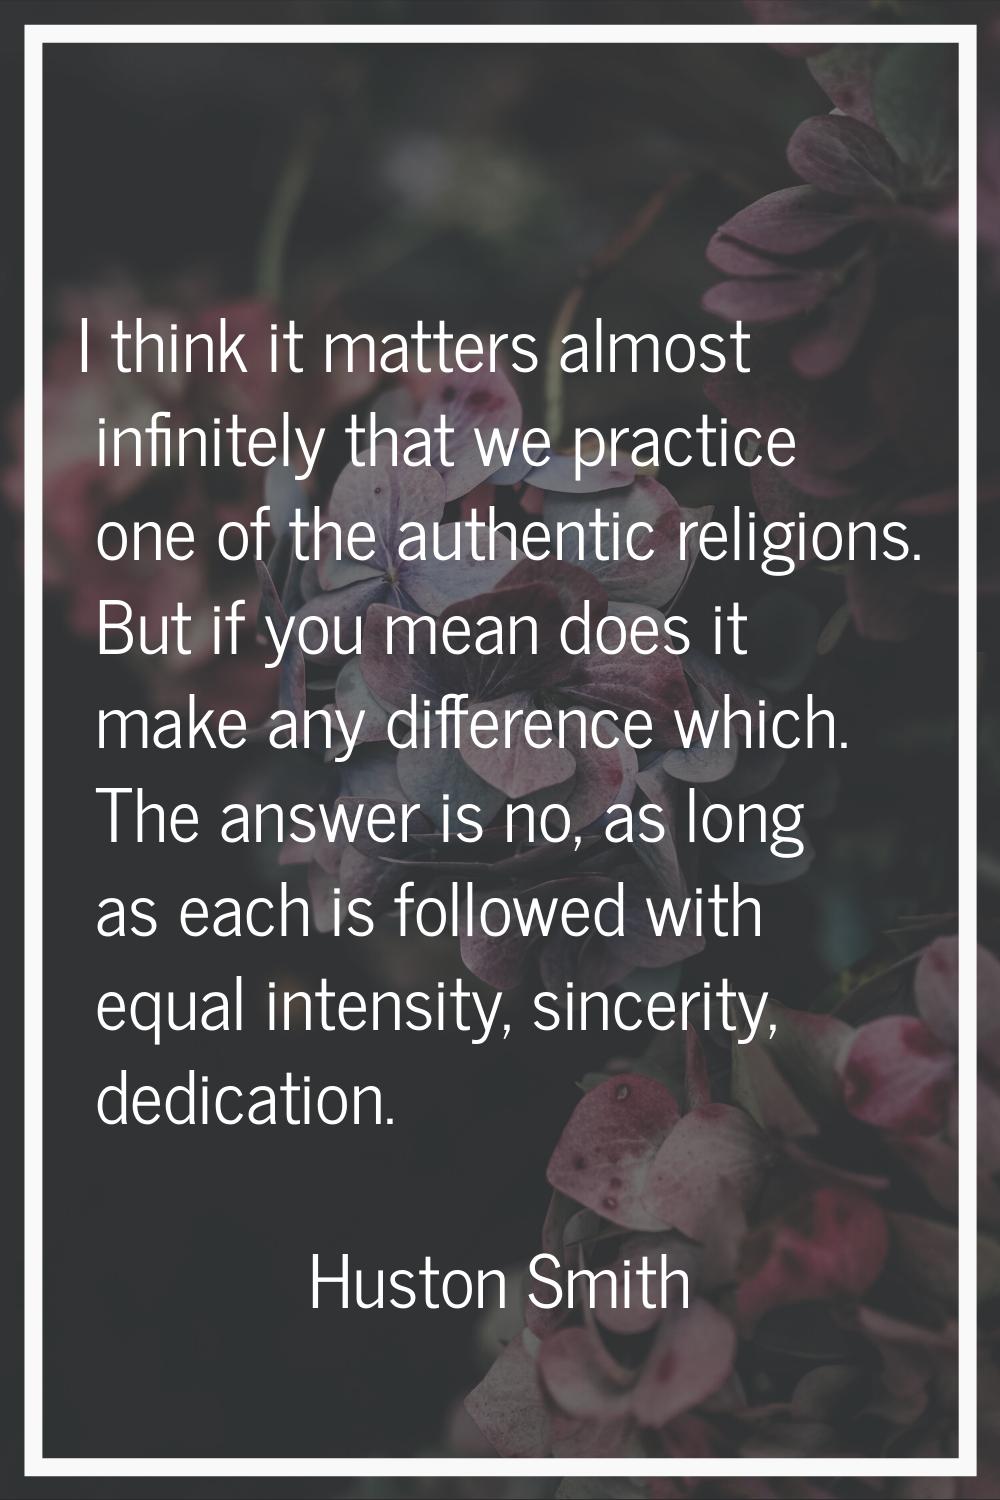 I think it matters almost infinitely that we practice one of the authentic religions. But if you me